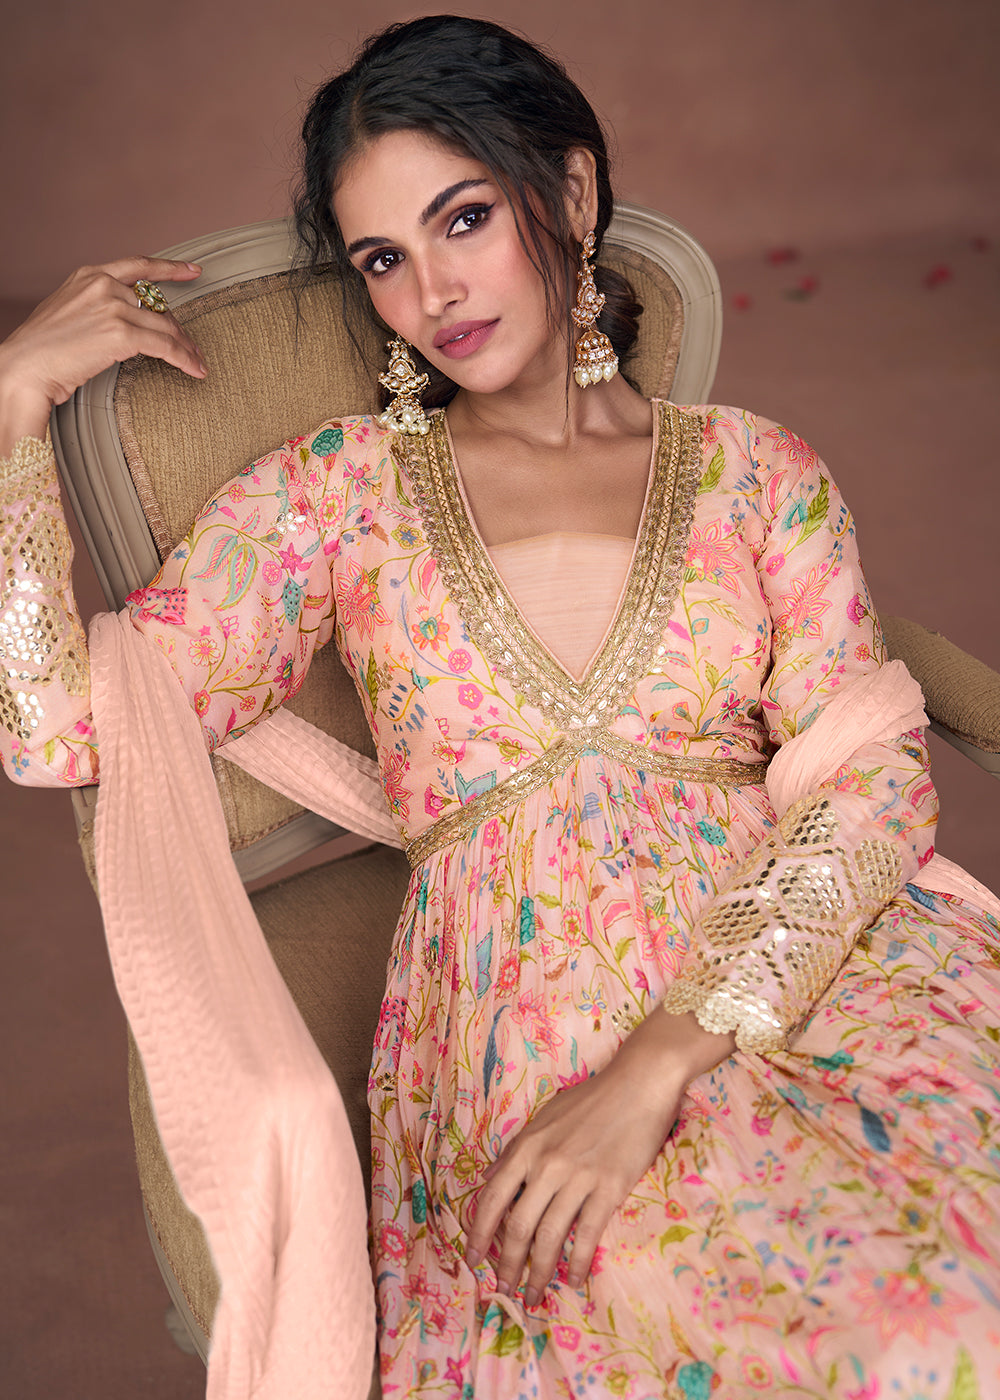 Light Pink Floral Printed Organza Silk Anarkali Suit with Embroidery work